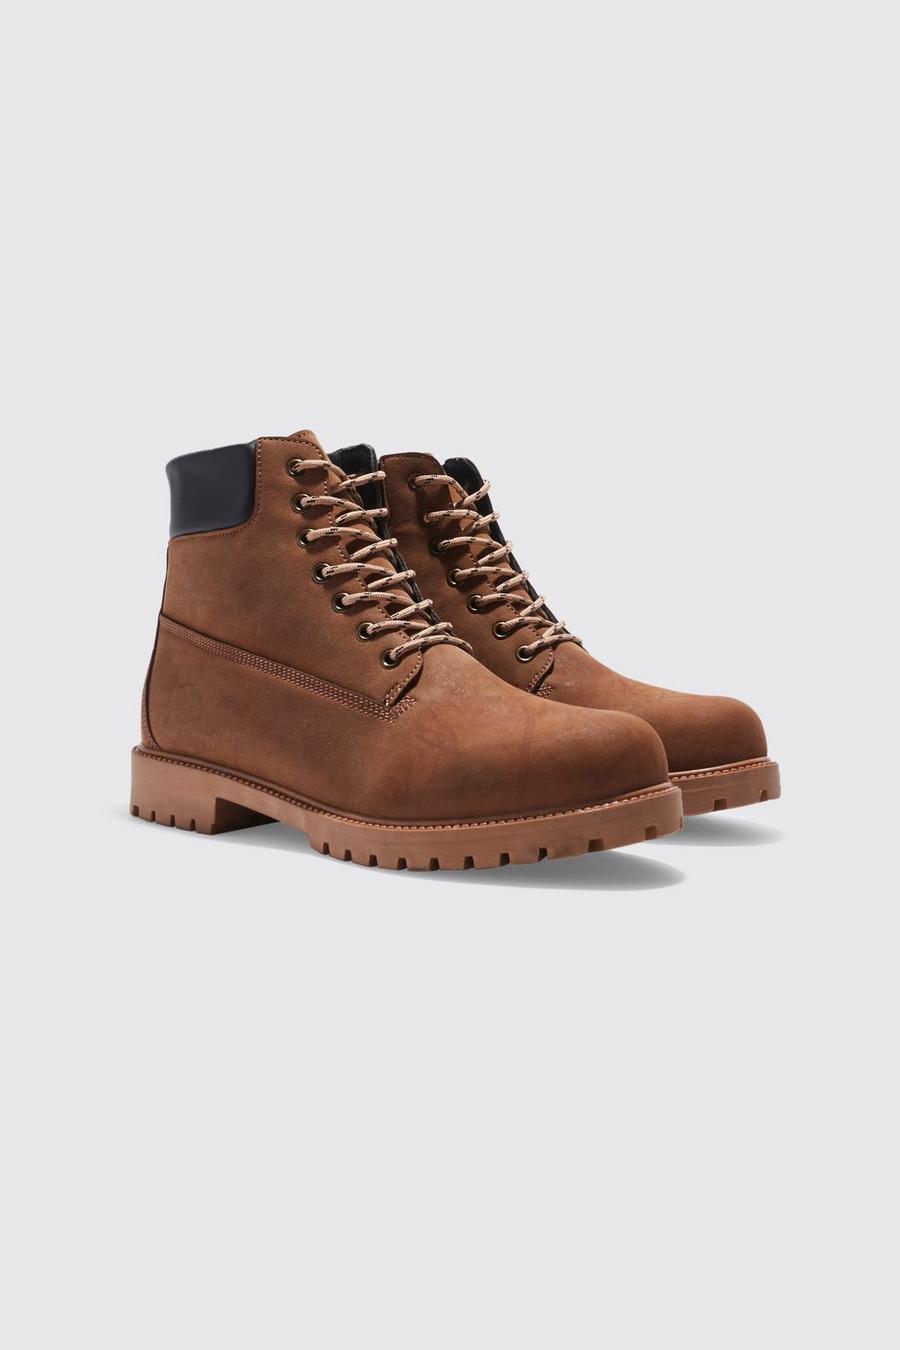 Worker Boots, Tan brown